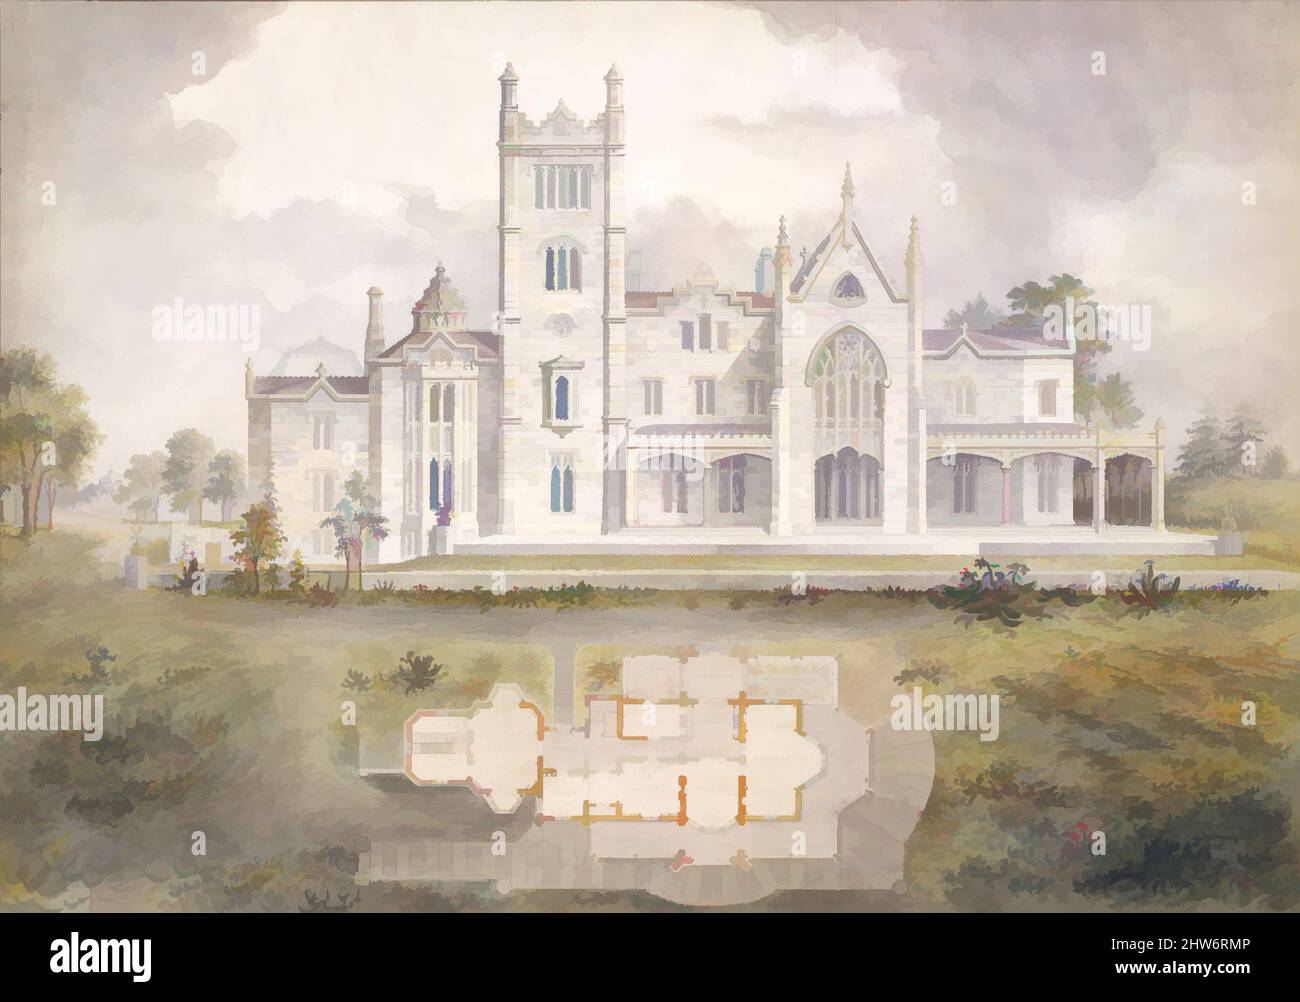 Art inspired by Lyndhurst for George Merritt, Tarrytown, New York (west rear elevation and plan), 1865, Watercolor, ink, and graphite on paper, Sheet: 18 7/8 x 26 5/8 in. (47.9 x 67.6 cm), Alexander Jackson Davis (American, New York 1803–1892 West Orange, New Jersey), In 1864, Davis, Classic works modernized by Artotop with a splash of modernity. Shapes, color and value, eye-catching visual impact on art. Emotions through freedom of artworks in a contemporary way. A timeless message pursuing a wildly creative new direction. Artists turning to the digital medium and creating the Artotop NFT Stock Photo